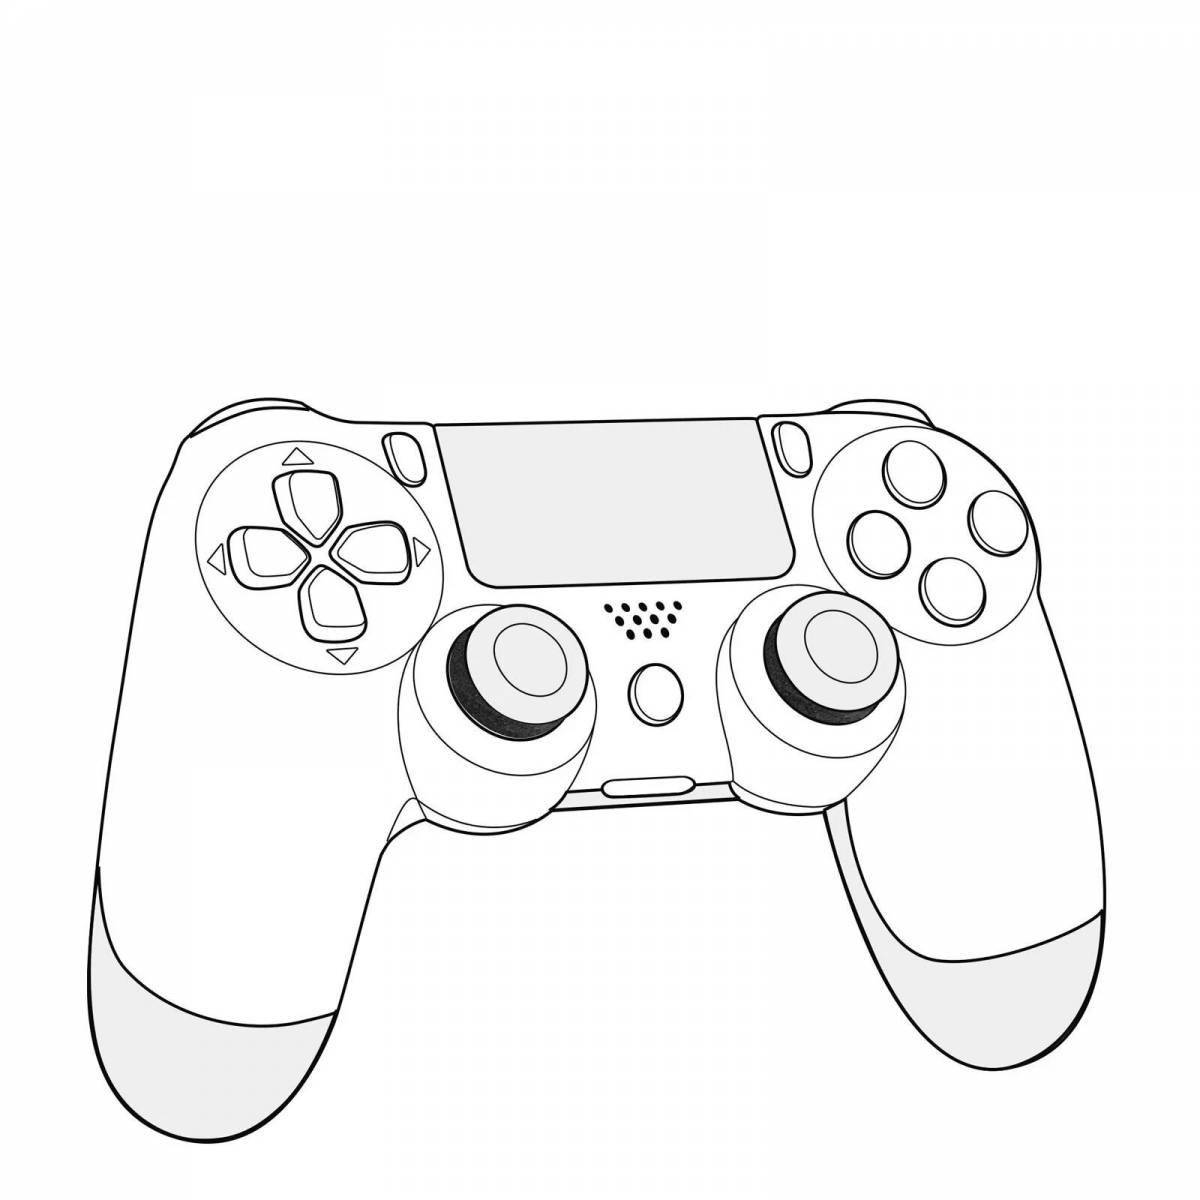 Colorful video game coloring page